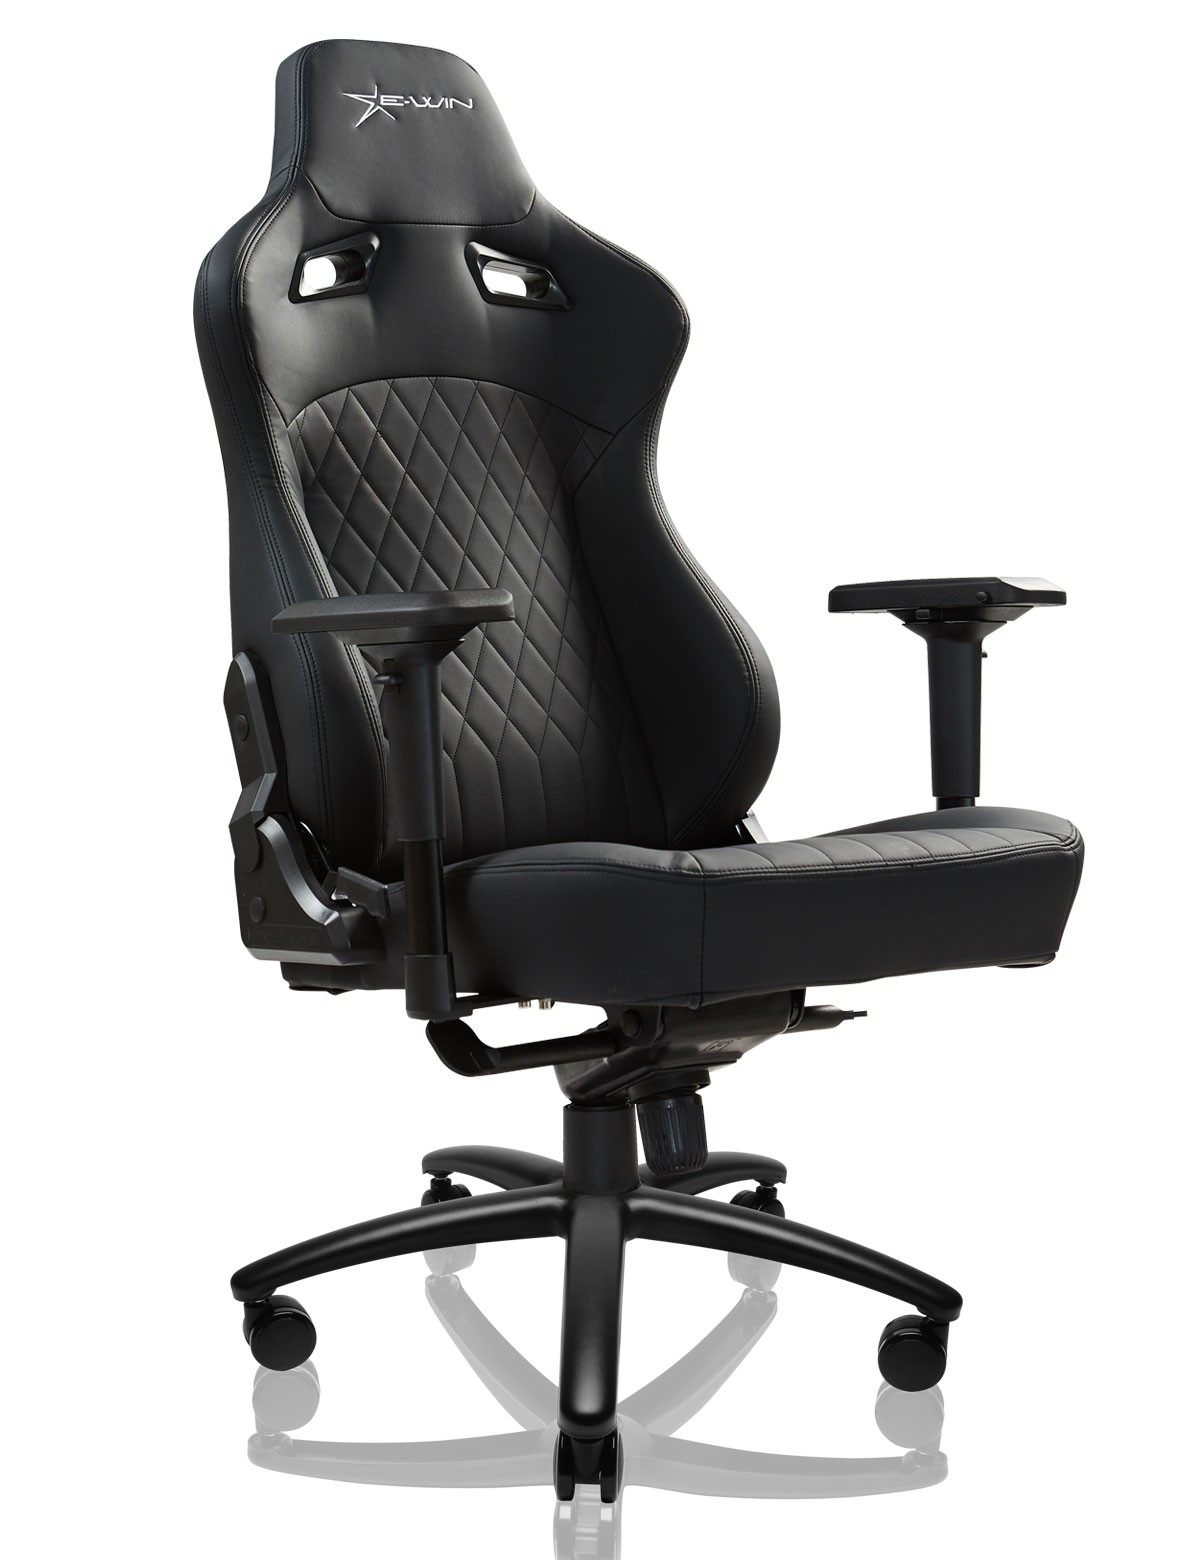 EWIN Flash XL Series Ergonomic Computer Gaming Office Chair with Pillows FLH XL $269 + Free Shipping